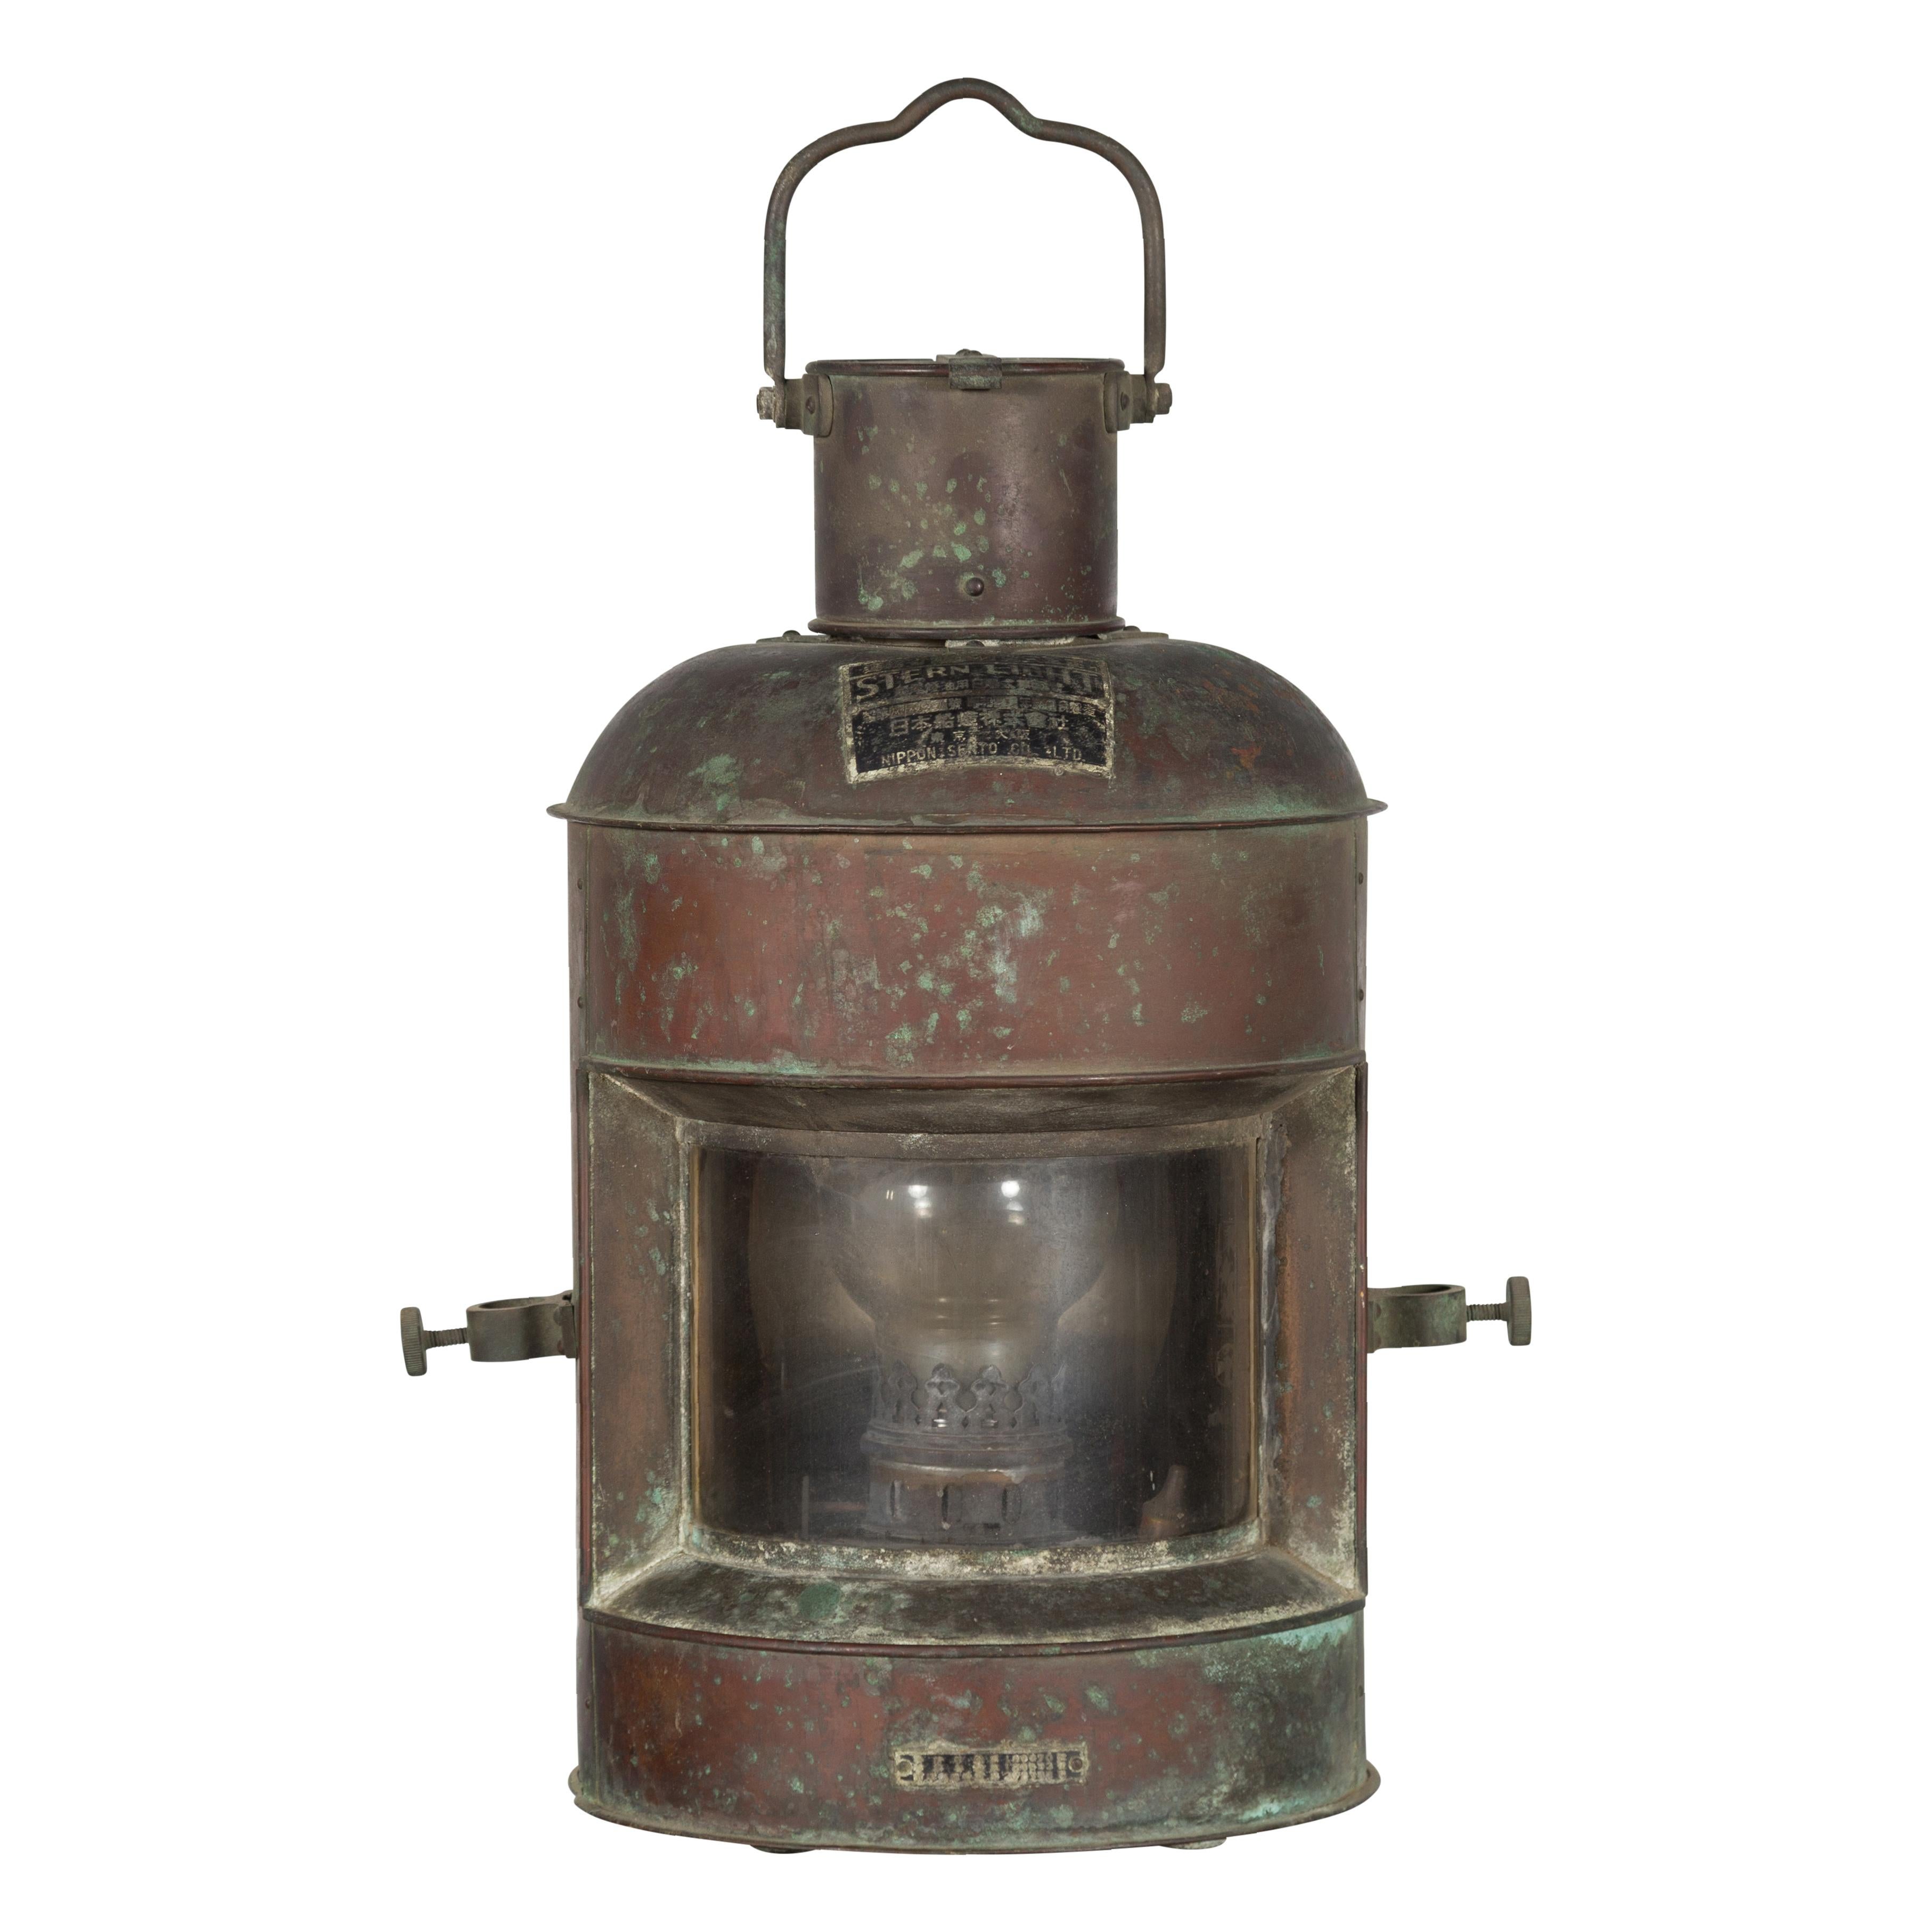 A Japanese metal ship's navigation stern light from the mid 20th century, made by Nippon Sento Co, ltd, with oxidized patina. Created in Japan during the mid 20th century, this stern light showcases a partially cylindrical shape topped by a hoisting